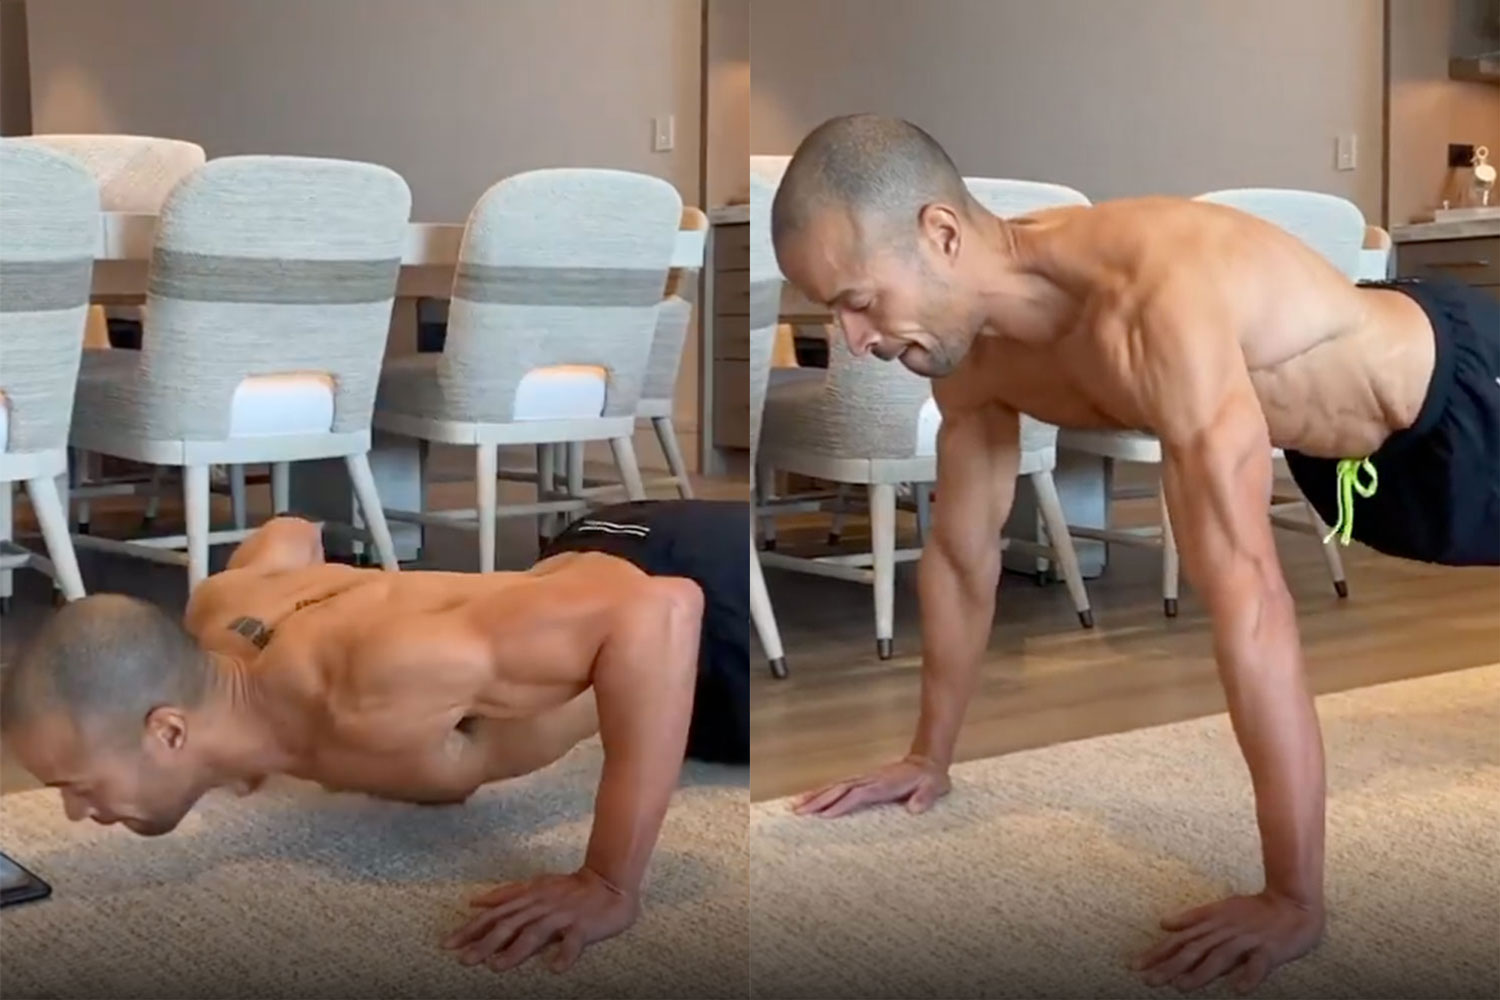 This 30-Rep Push-Up Challenge Could Give You Arms Like A Navy SEAL